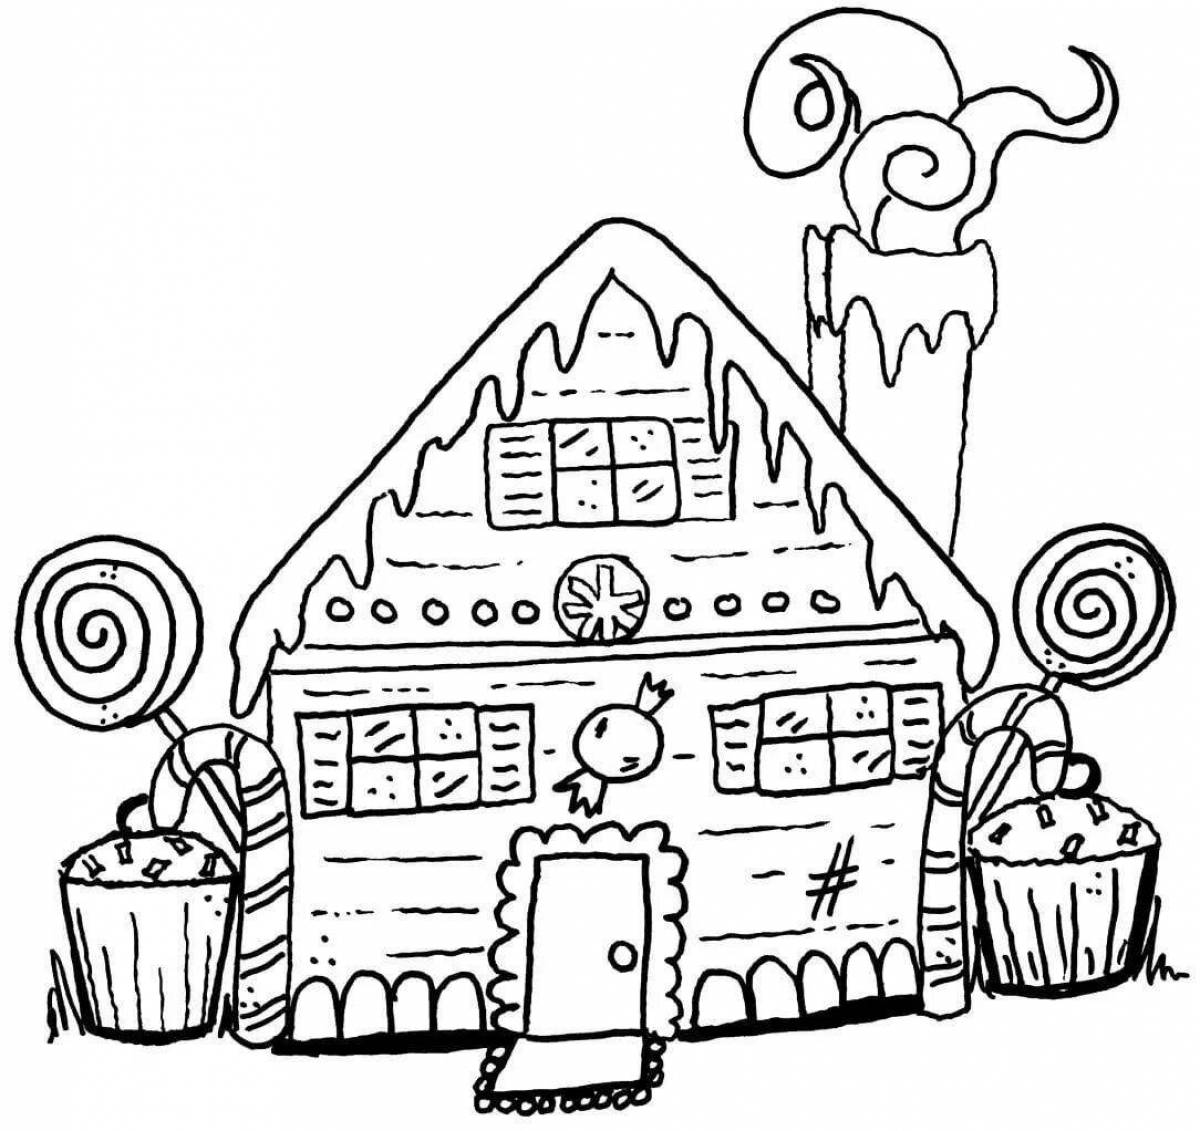 Exquisite fairy house coloring book